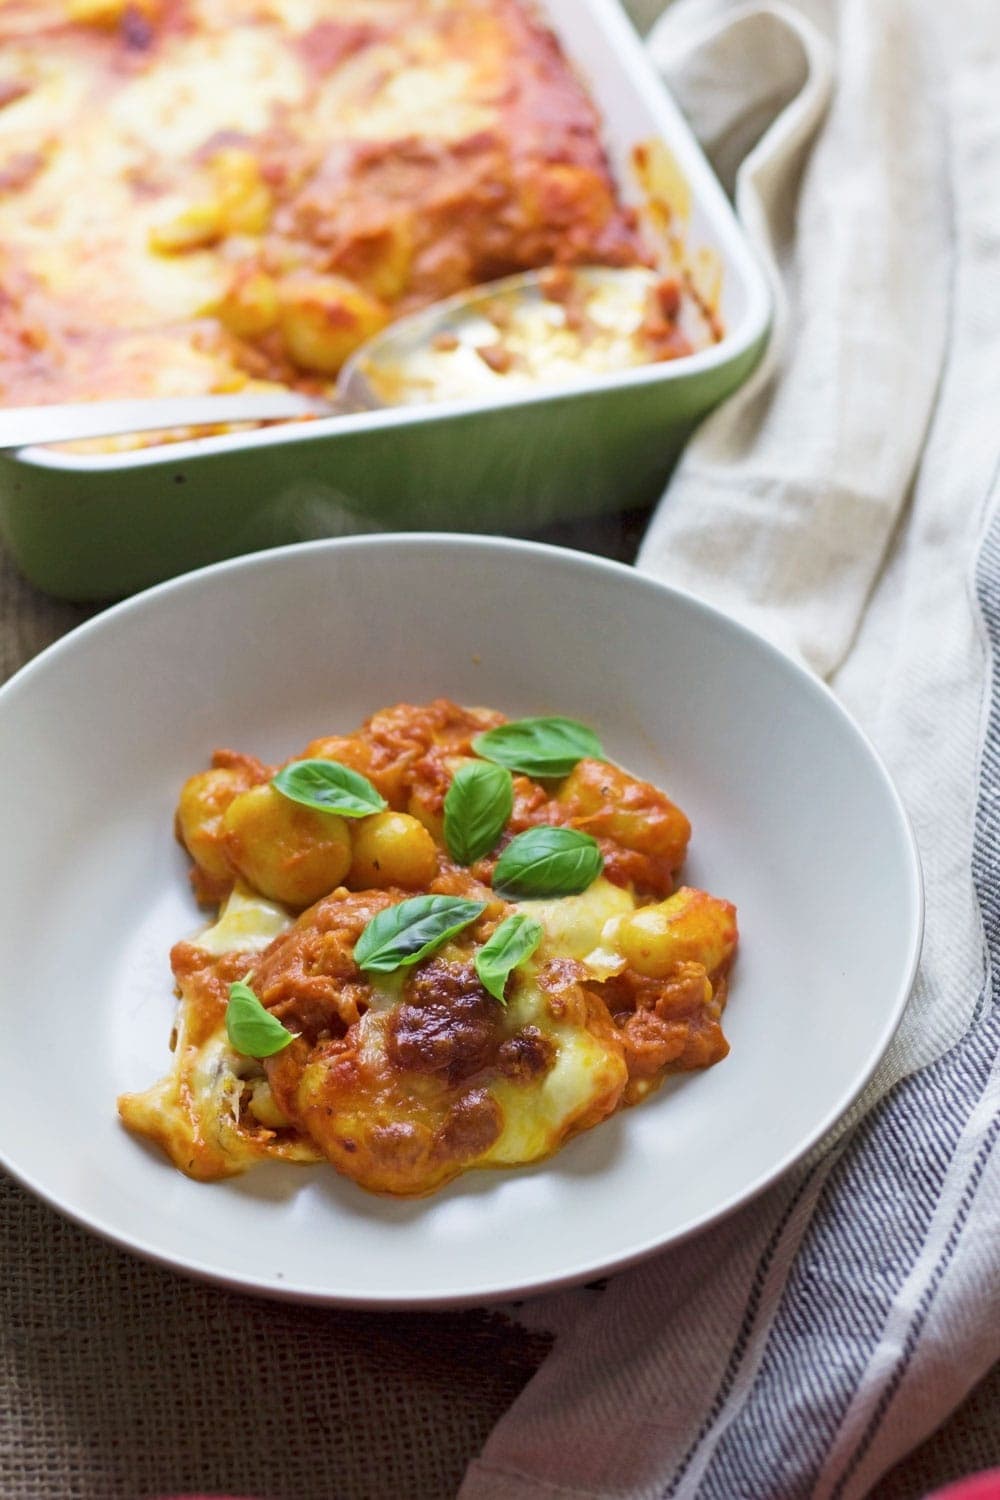 This cheese and tomato baked gnocchi is the perfect comfort dinner! Serve up a bowlful when you need a pick-me-up and you'll feel better in no time.